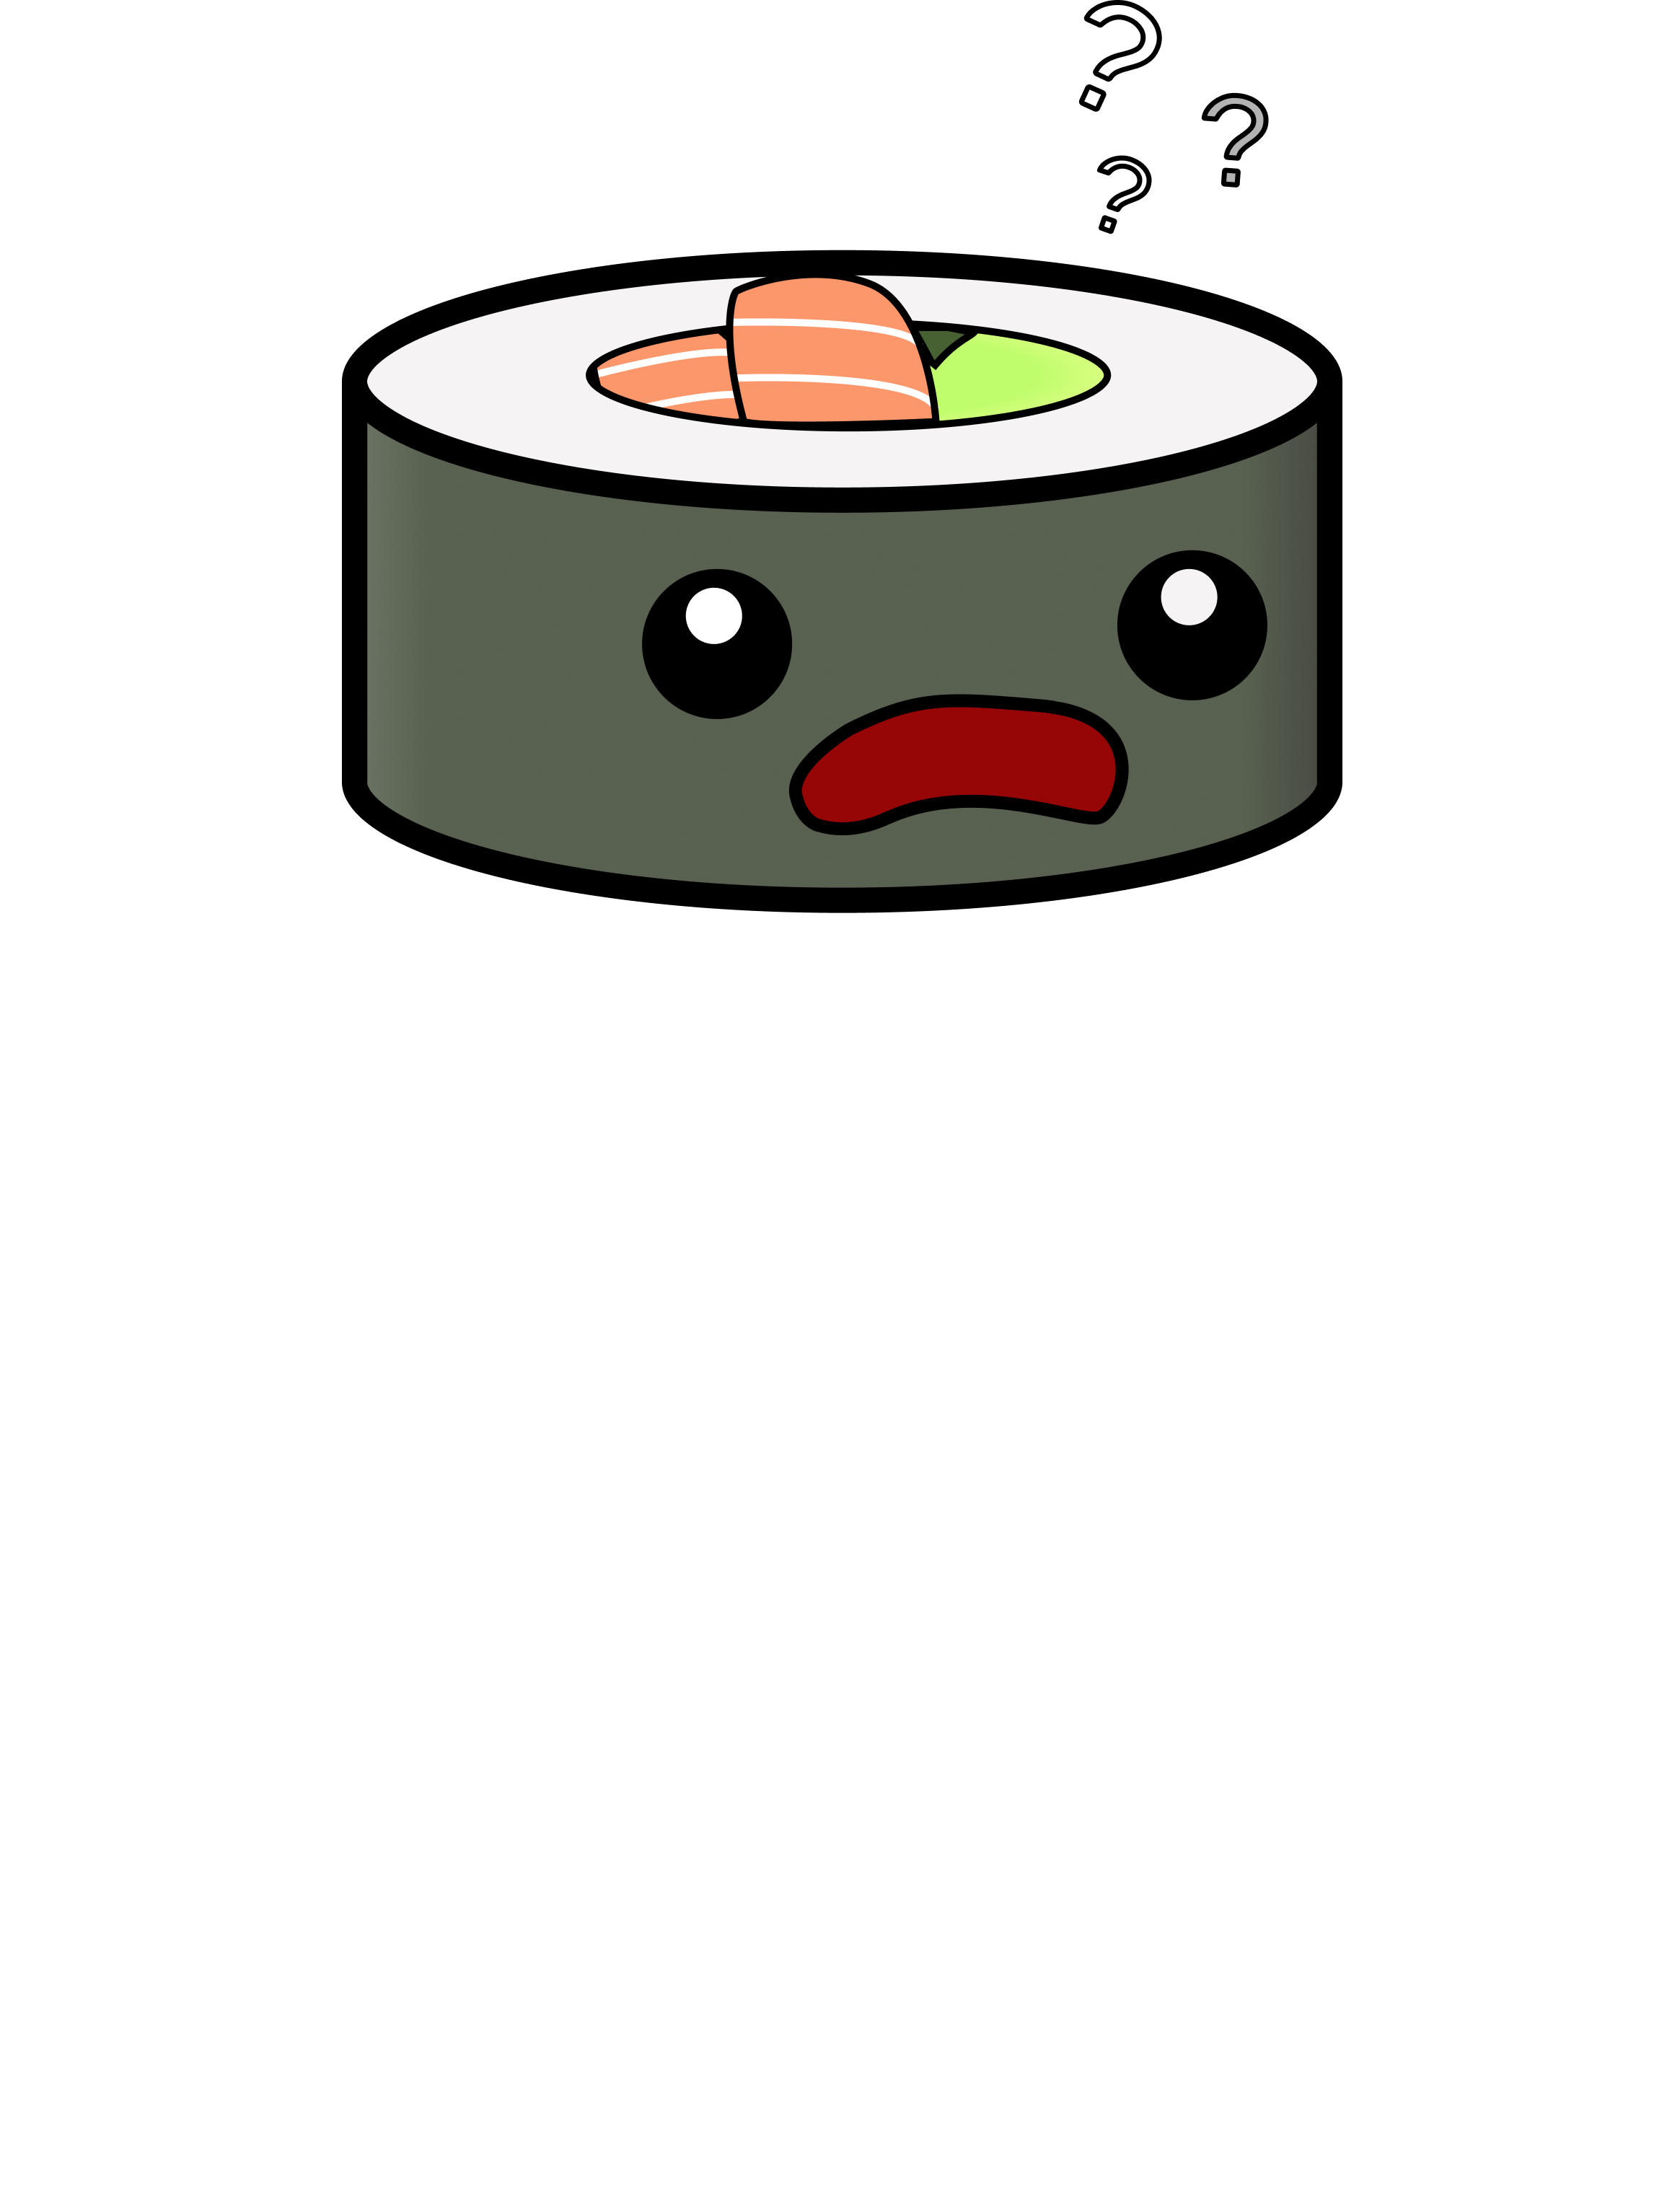 Logo of 'Confused Maki' showing a confused Maki Sushi Roll, the text 'Confused Maki' below and 'Coming soon' written below that